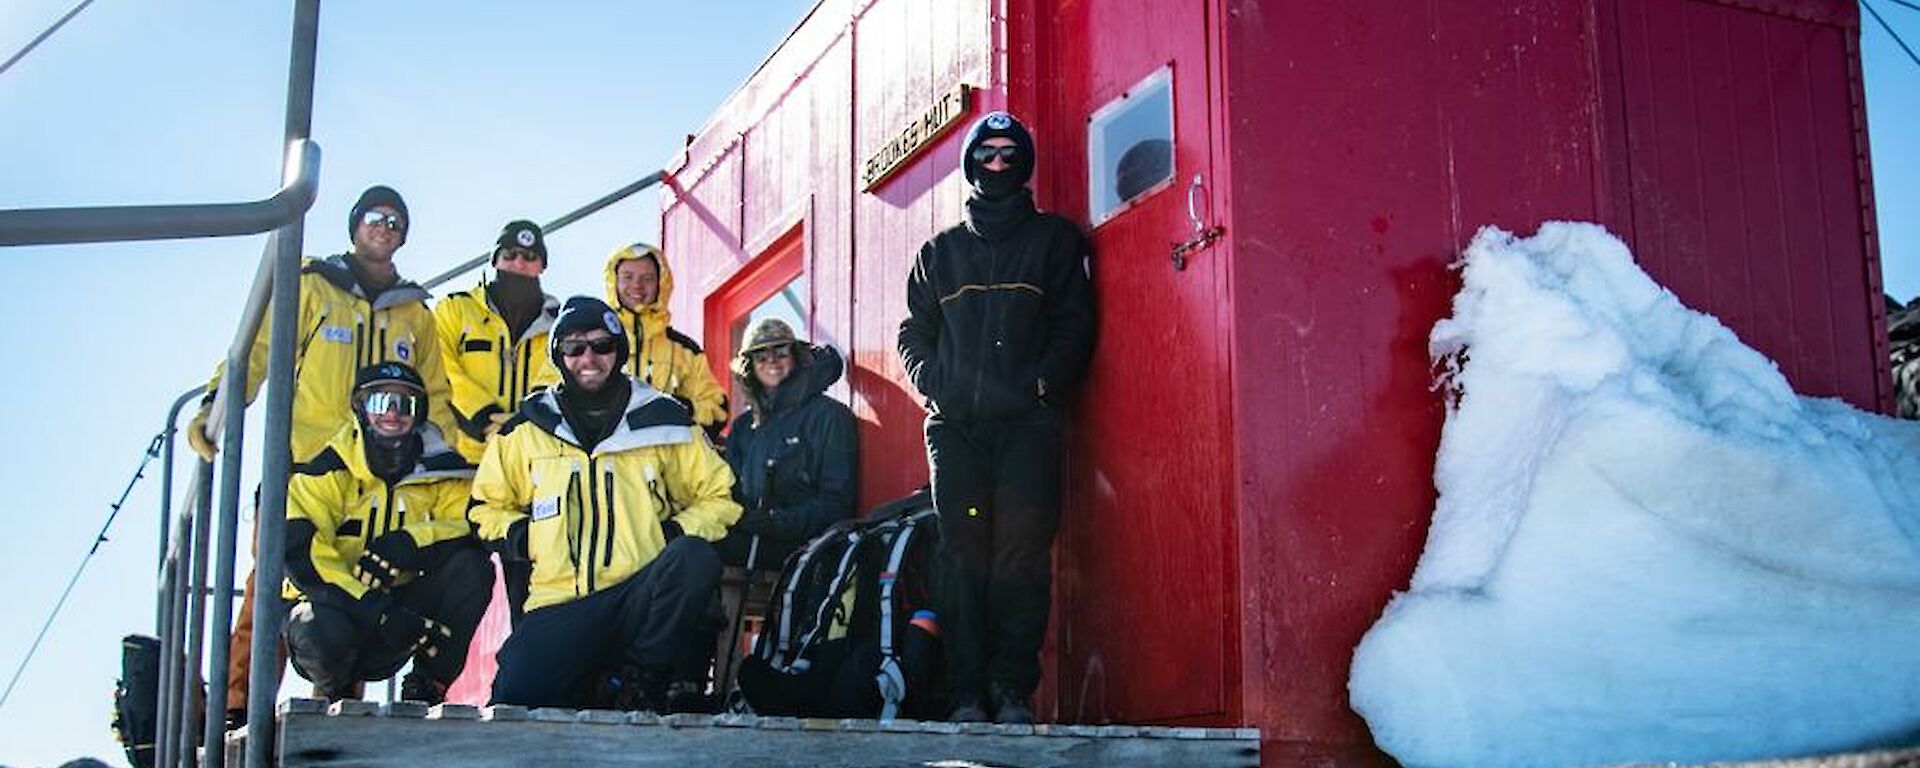 A group of smiling people in yellow cold weather clothing stand on the deck of a red field hut.